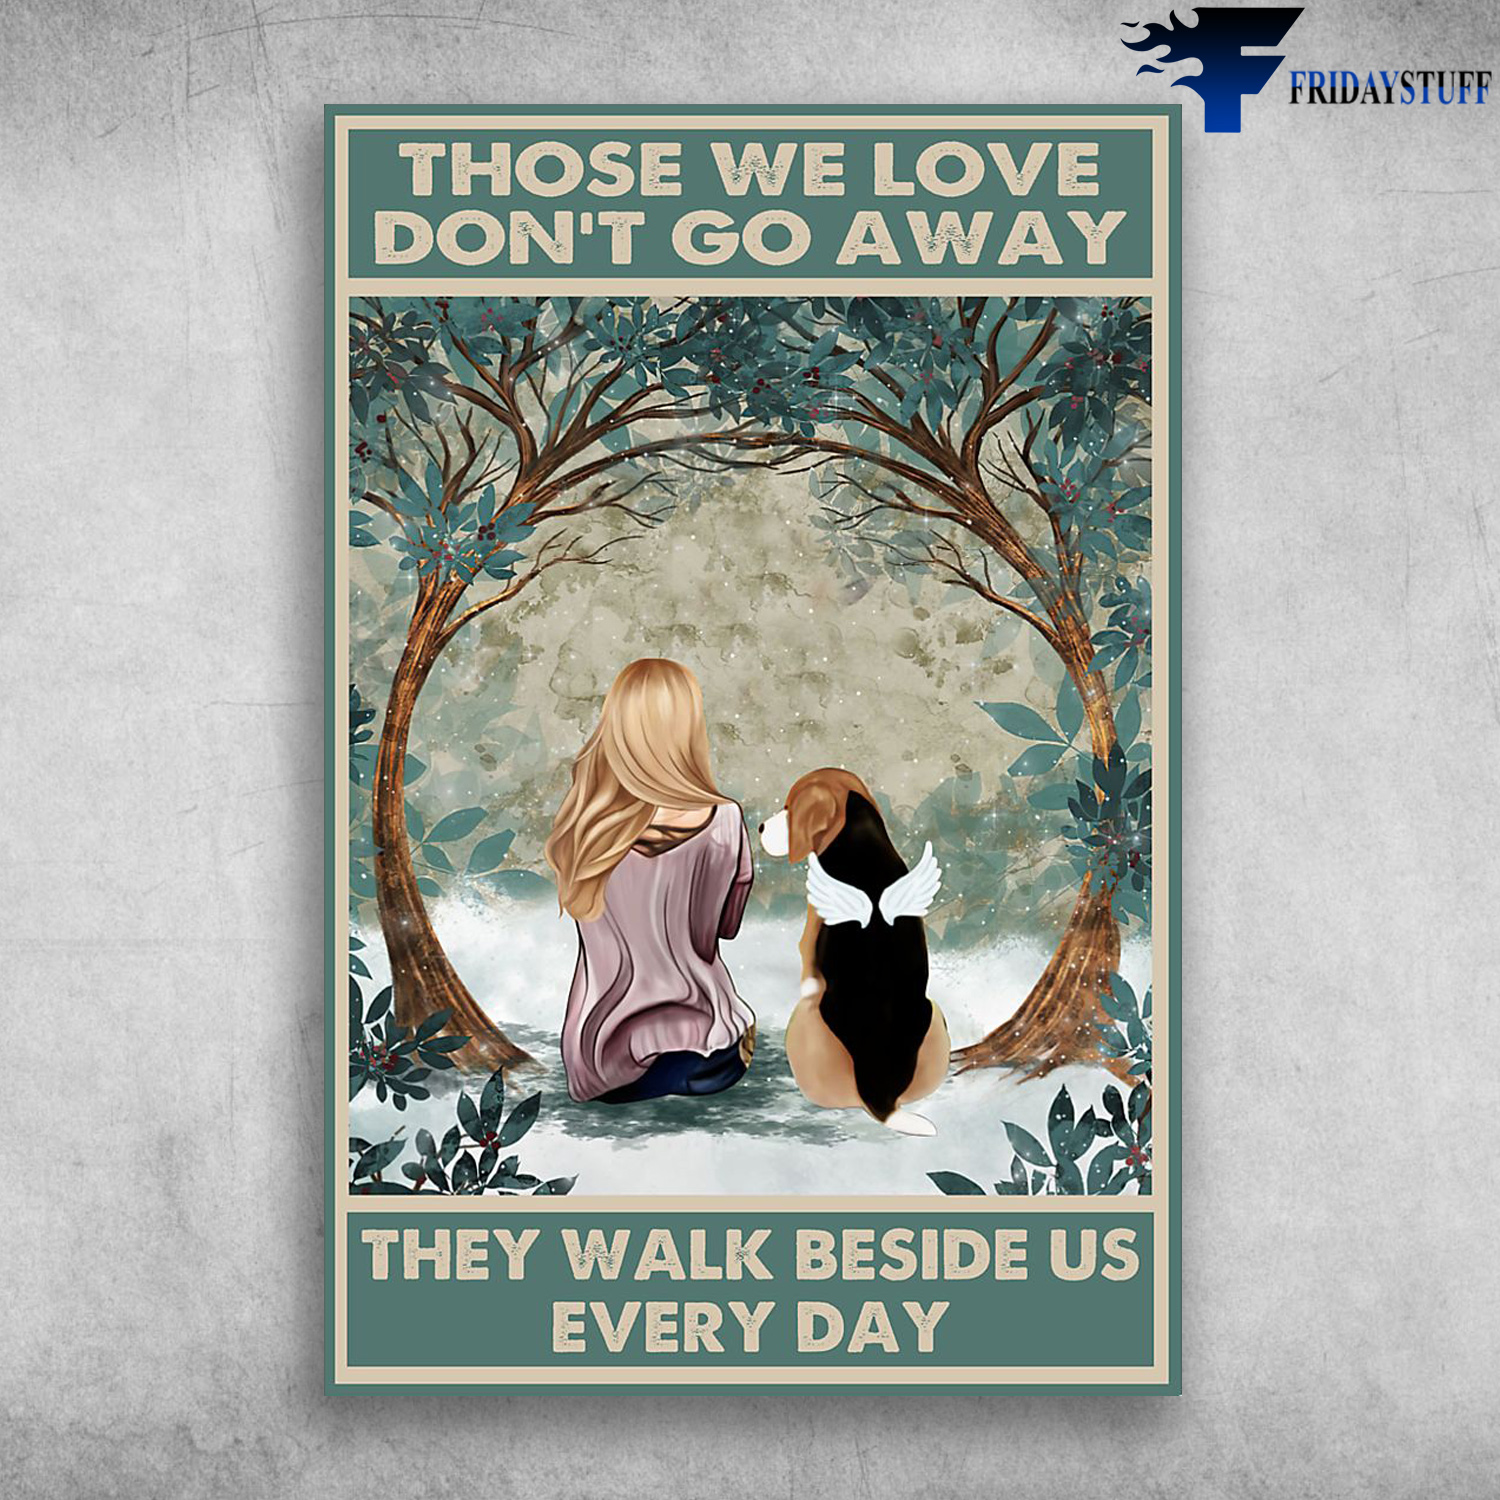 Beagle Dog And The Girl - Those We Love Don't Go Away, They Walk Deside Us Everyday